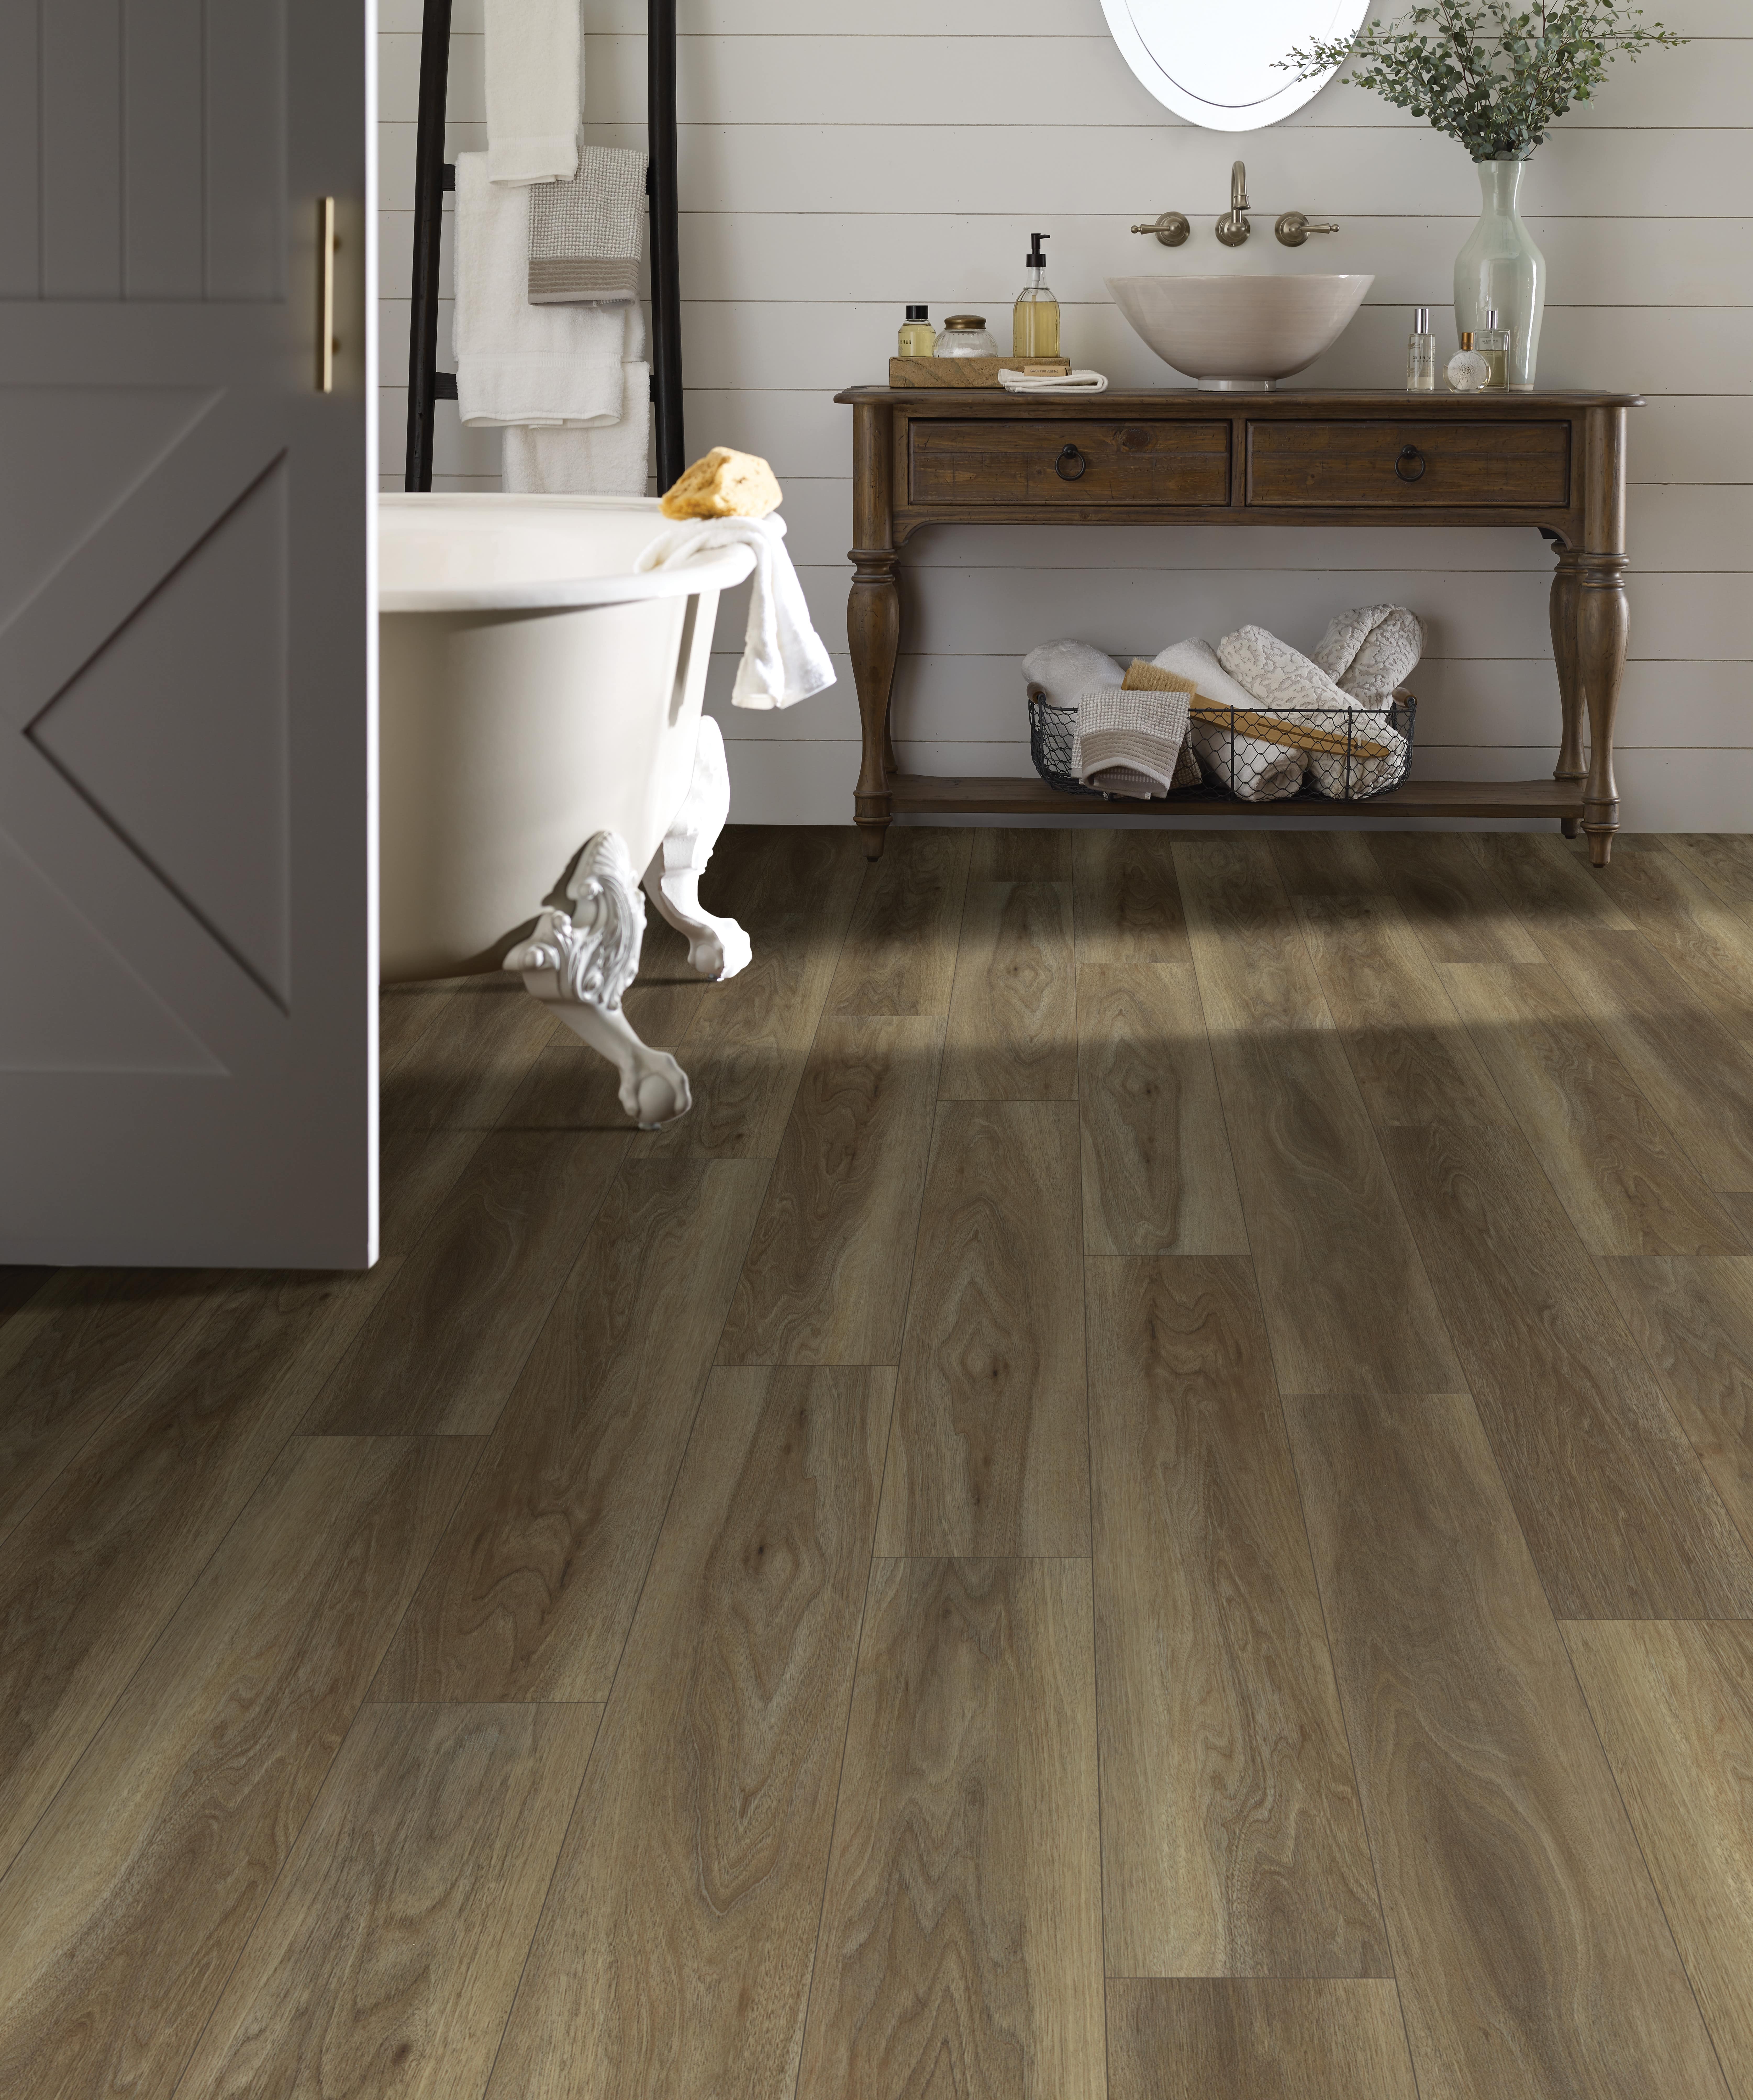 Wood Floor Bathrooms How To Do Them Right Floorings - Is It Ok To Put Laminate Flooring In A Bathroom